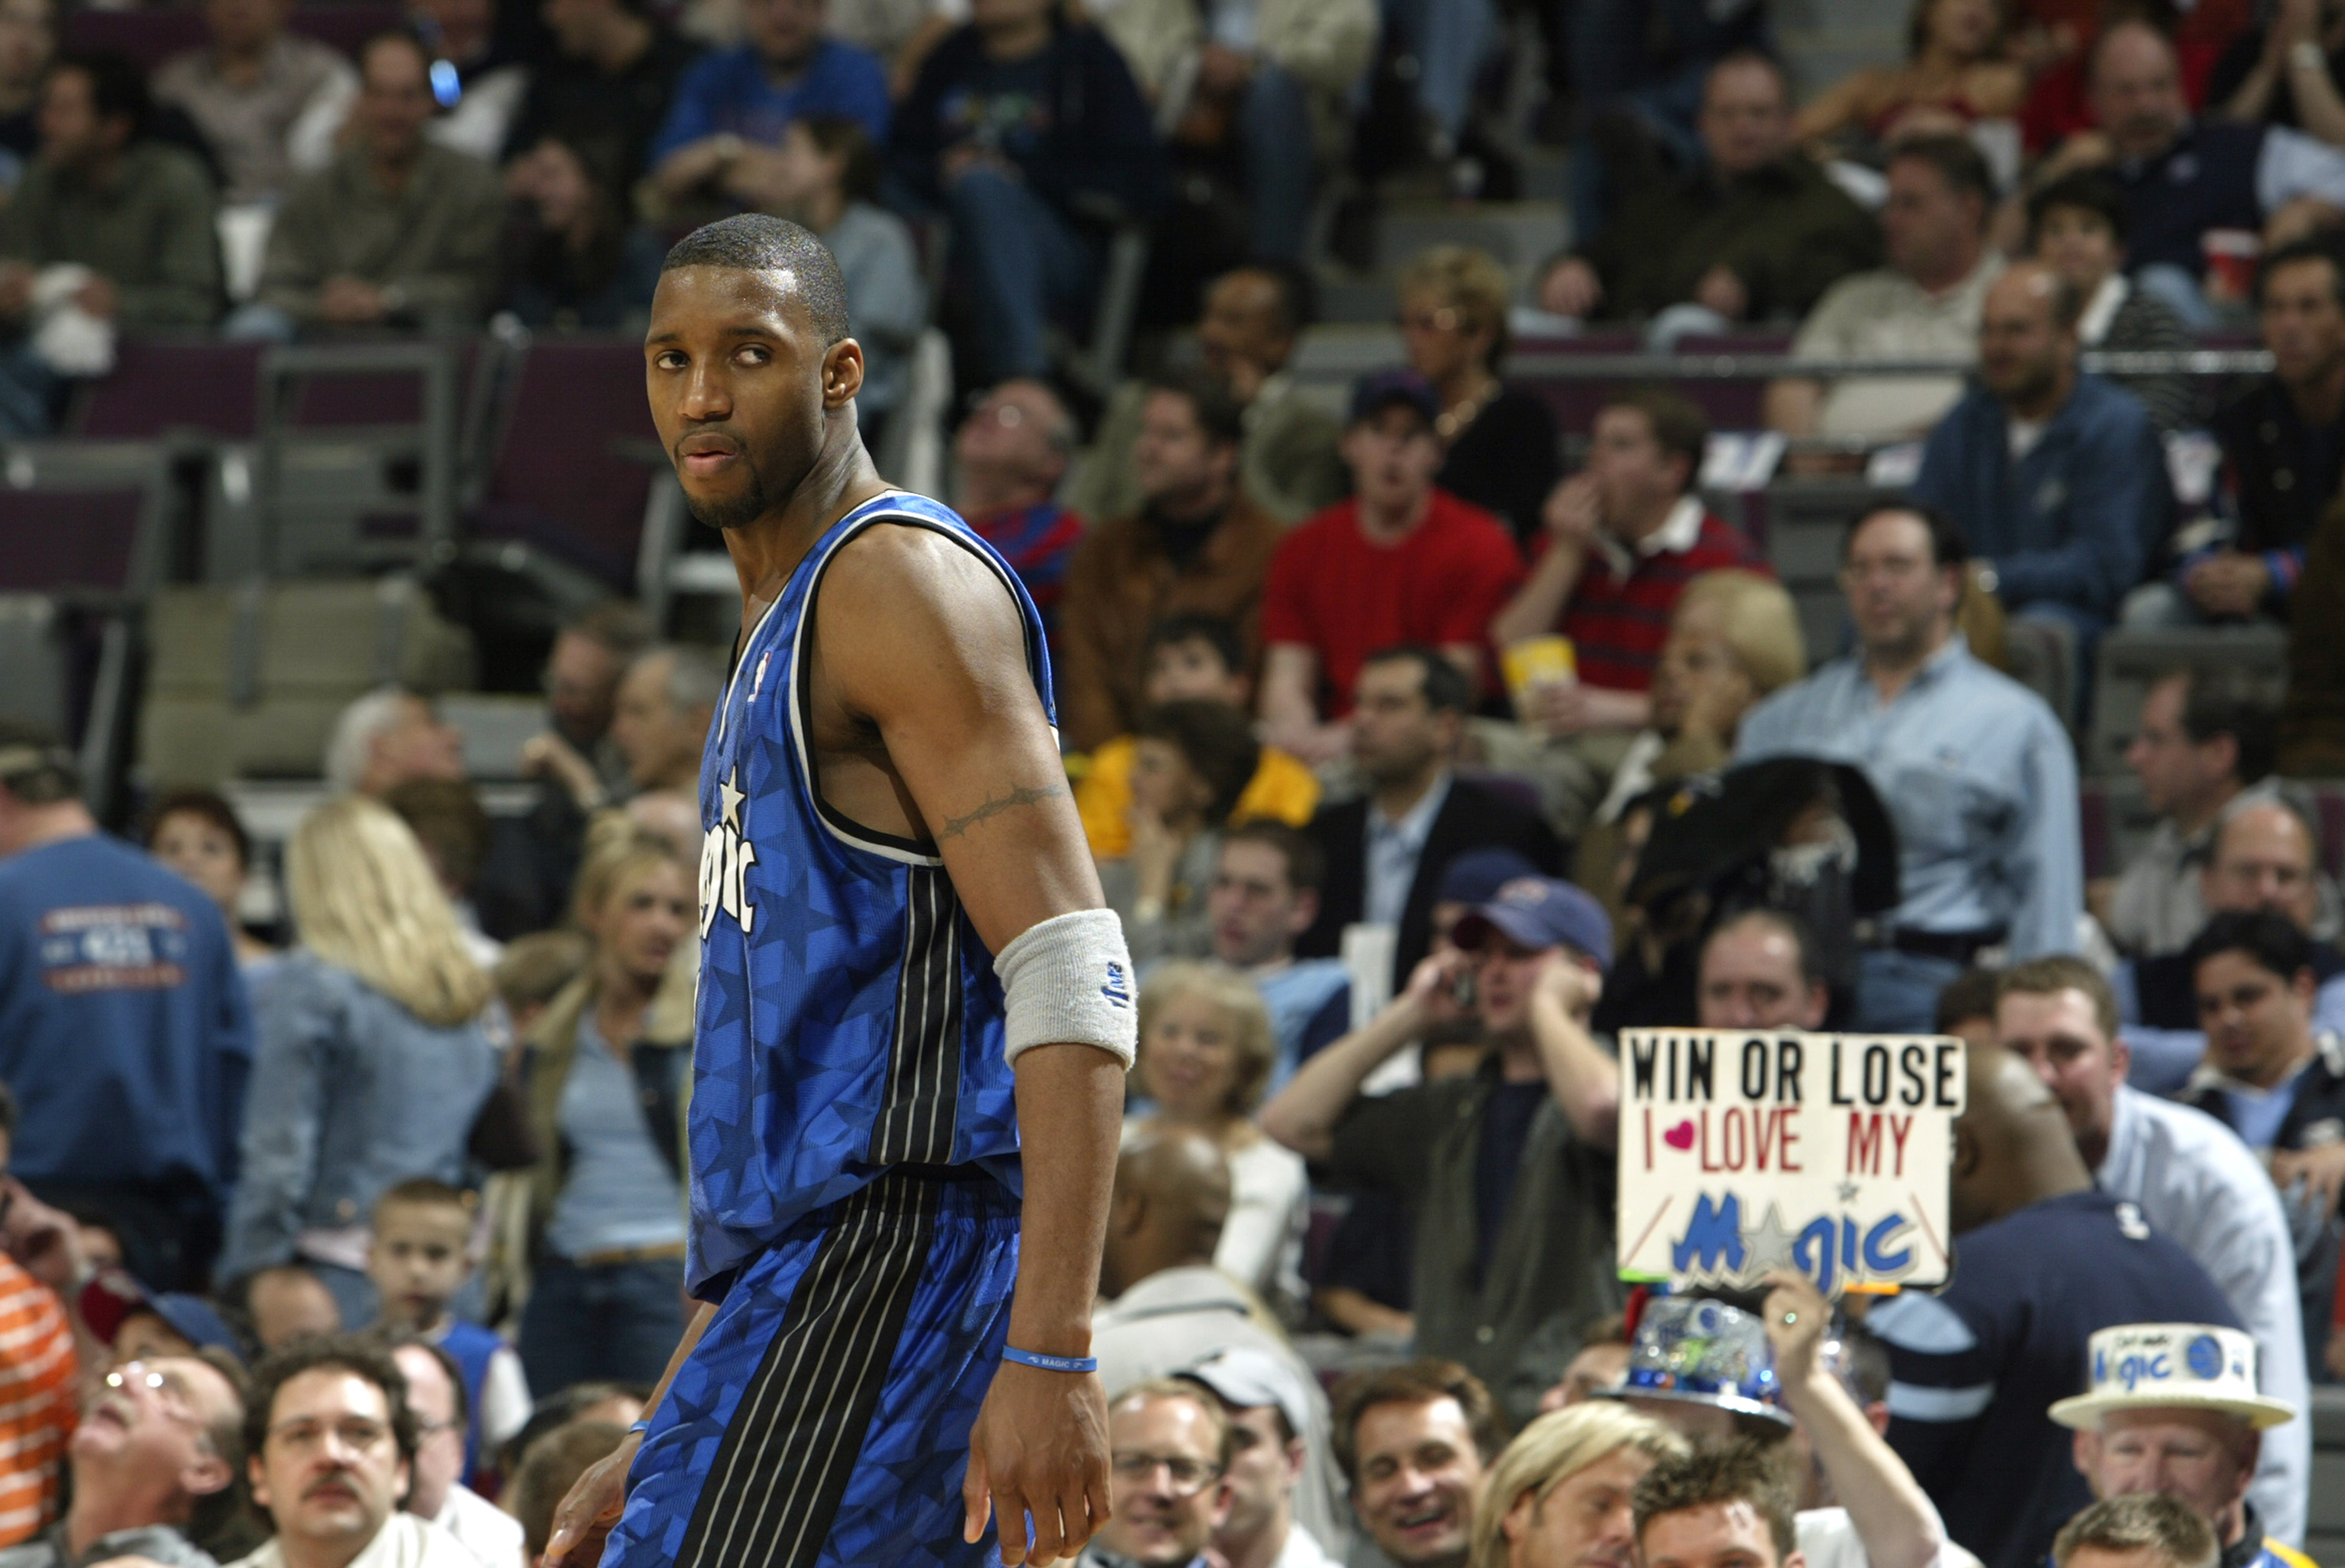 Tracy McGrady looks on during a game against the Detroit Pistons in the 2003 NBA Playoffs